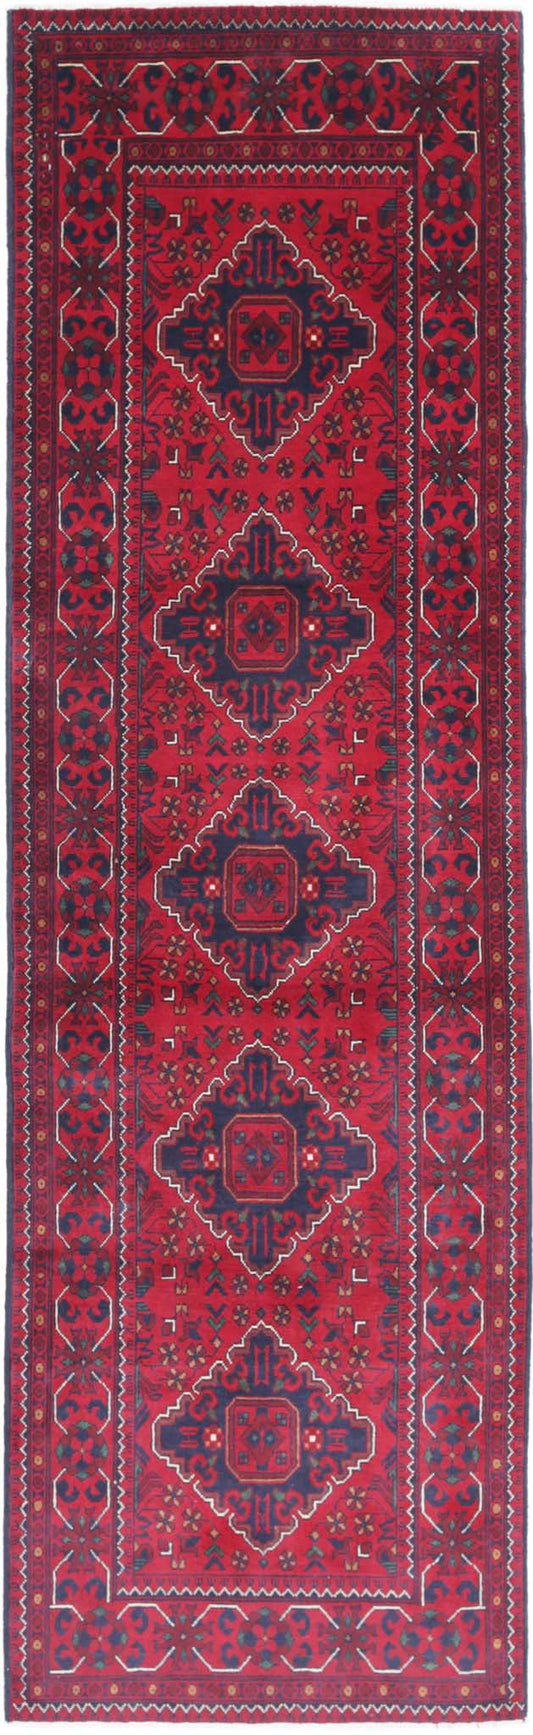 Tribal Hand Knotted Afghan Khamyab Wool Rug of Size 2'8'' X 9'3'' in Red and Black Colors - Made in Afghanistan